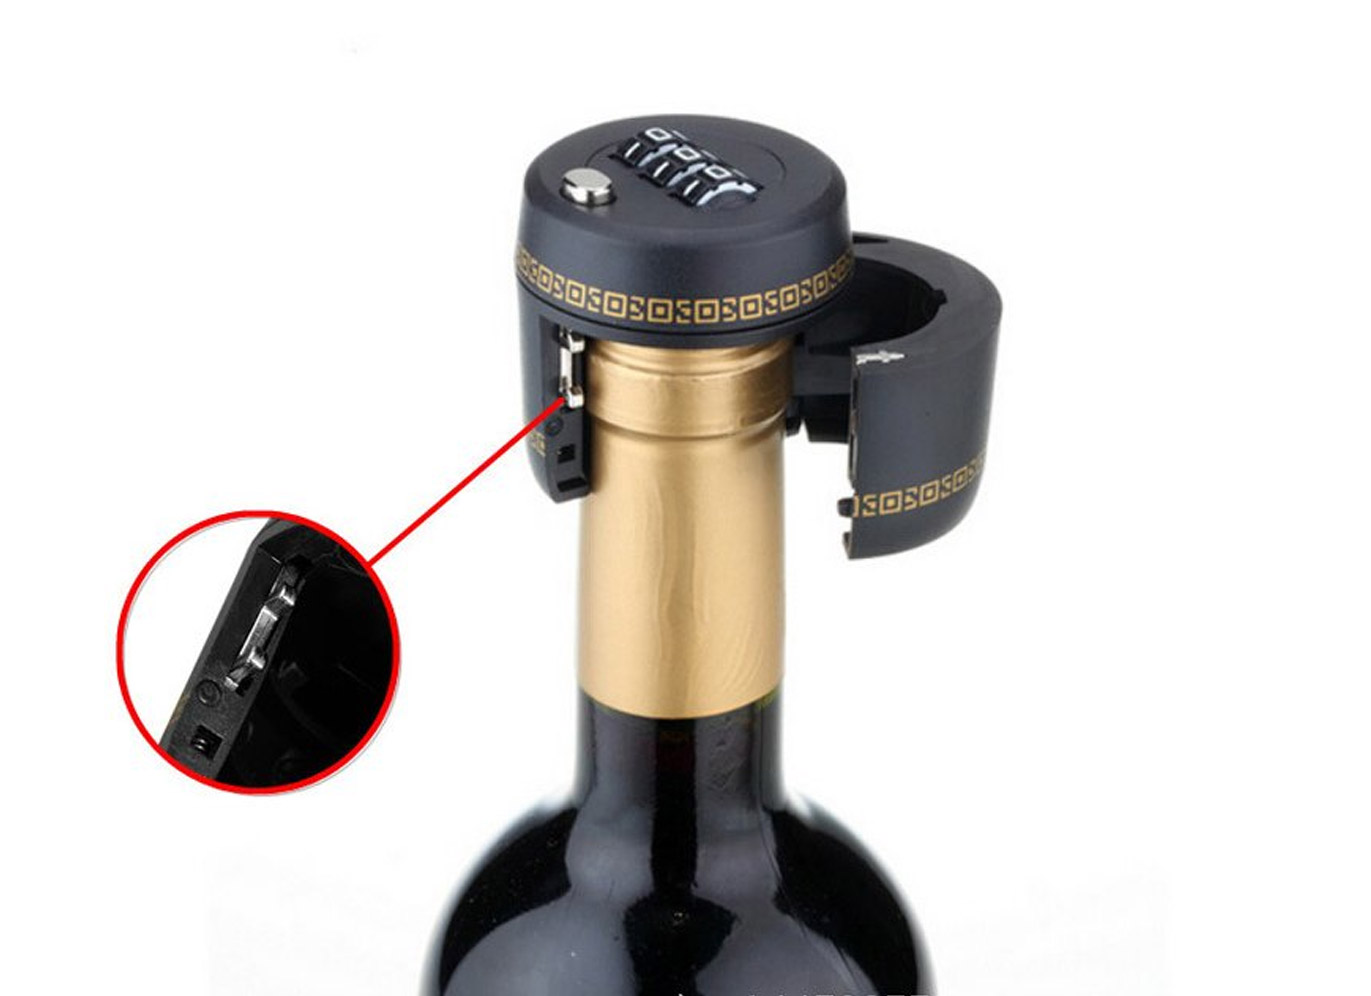 Combination Bottle Lock Secures wine and liquor bottles with password